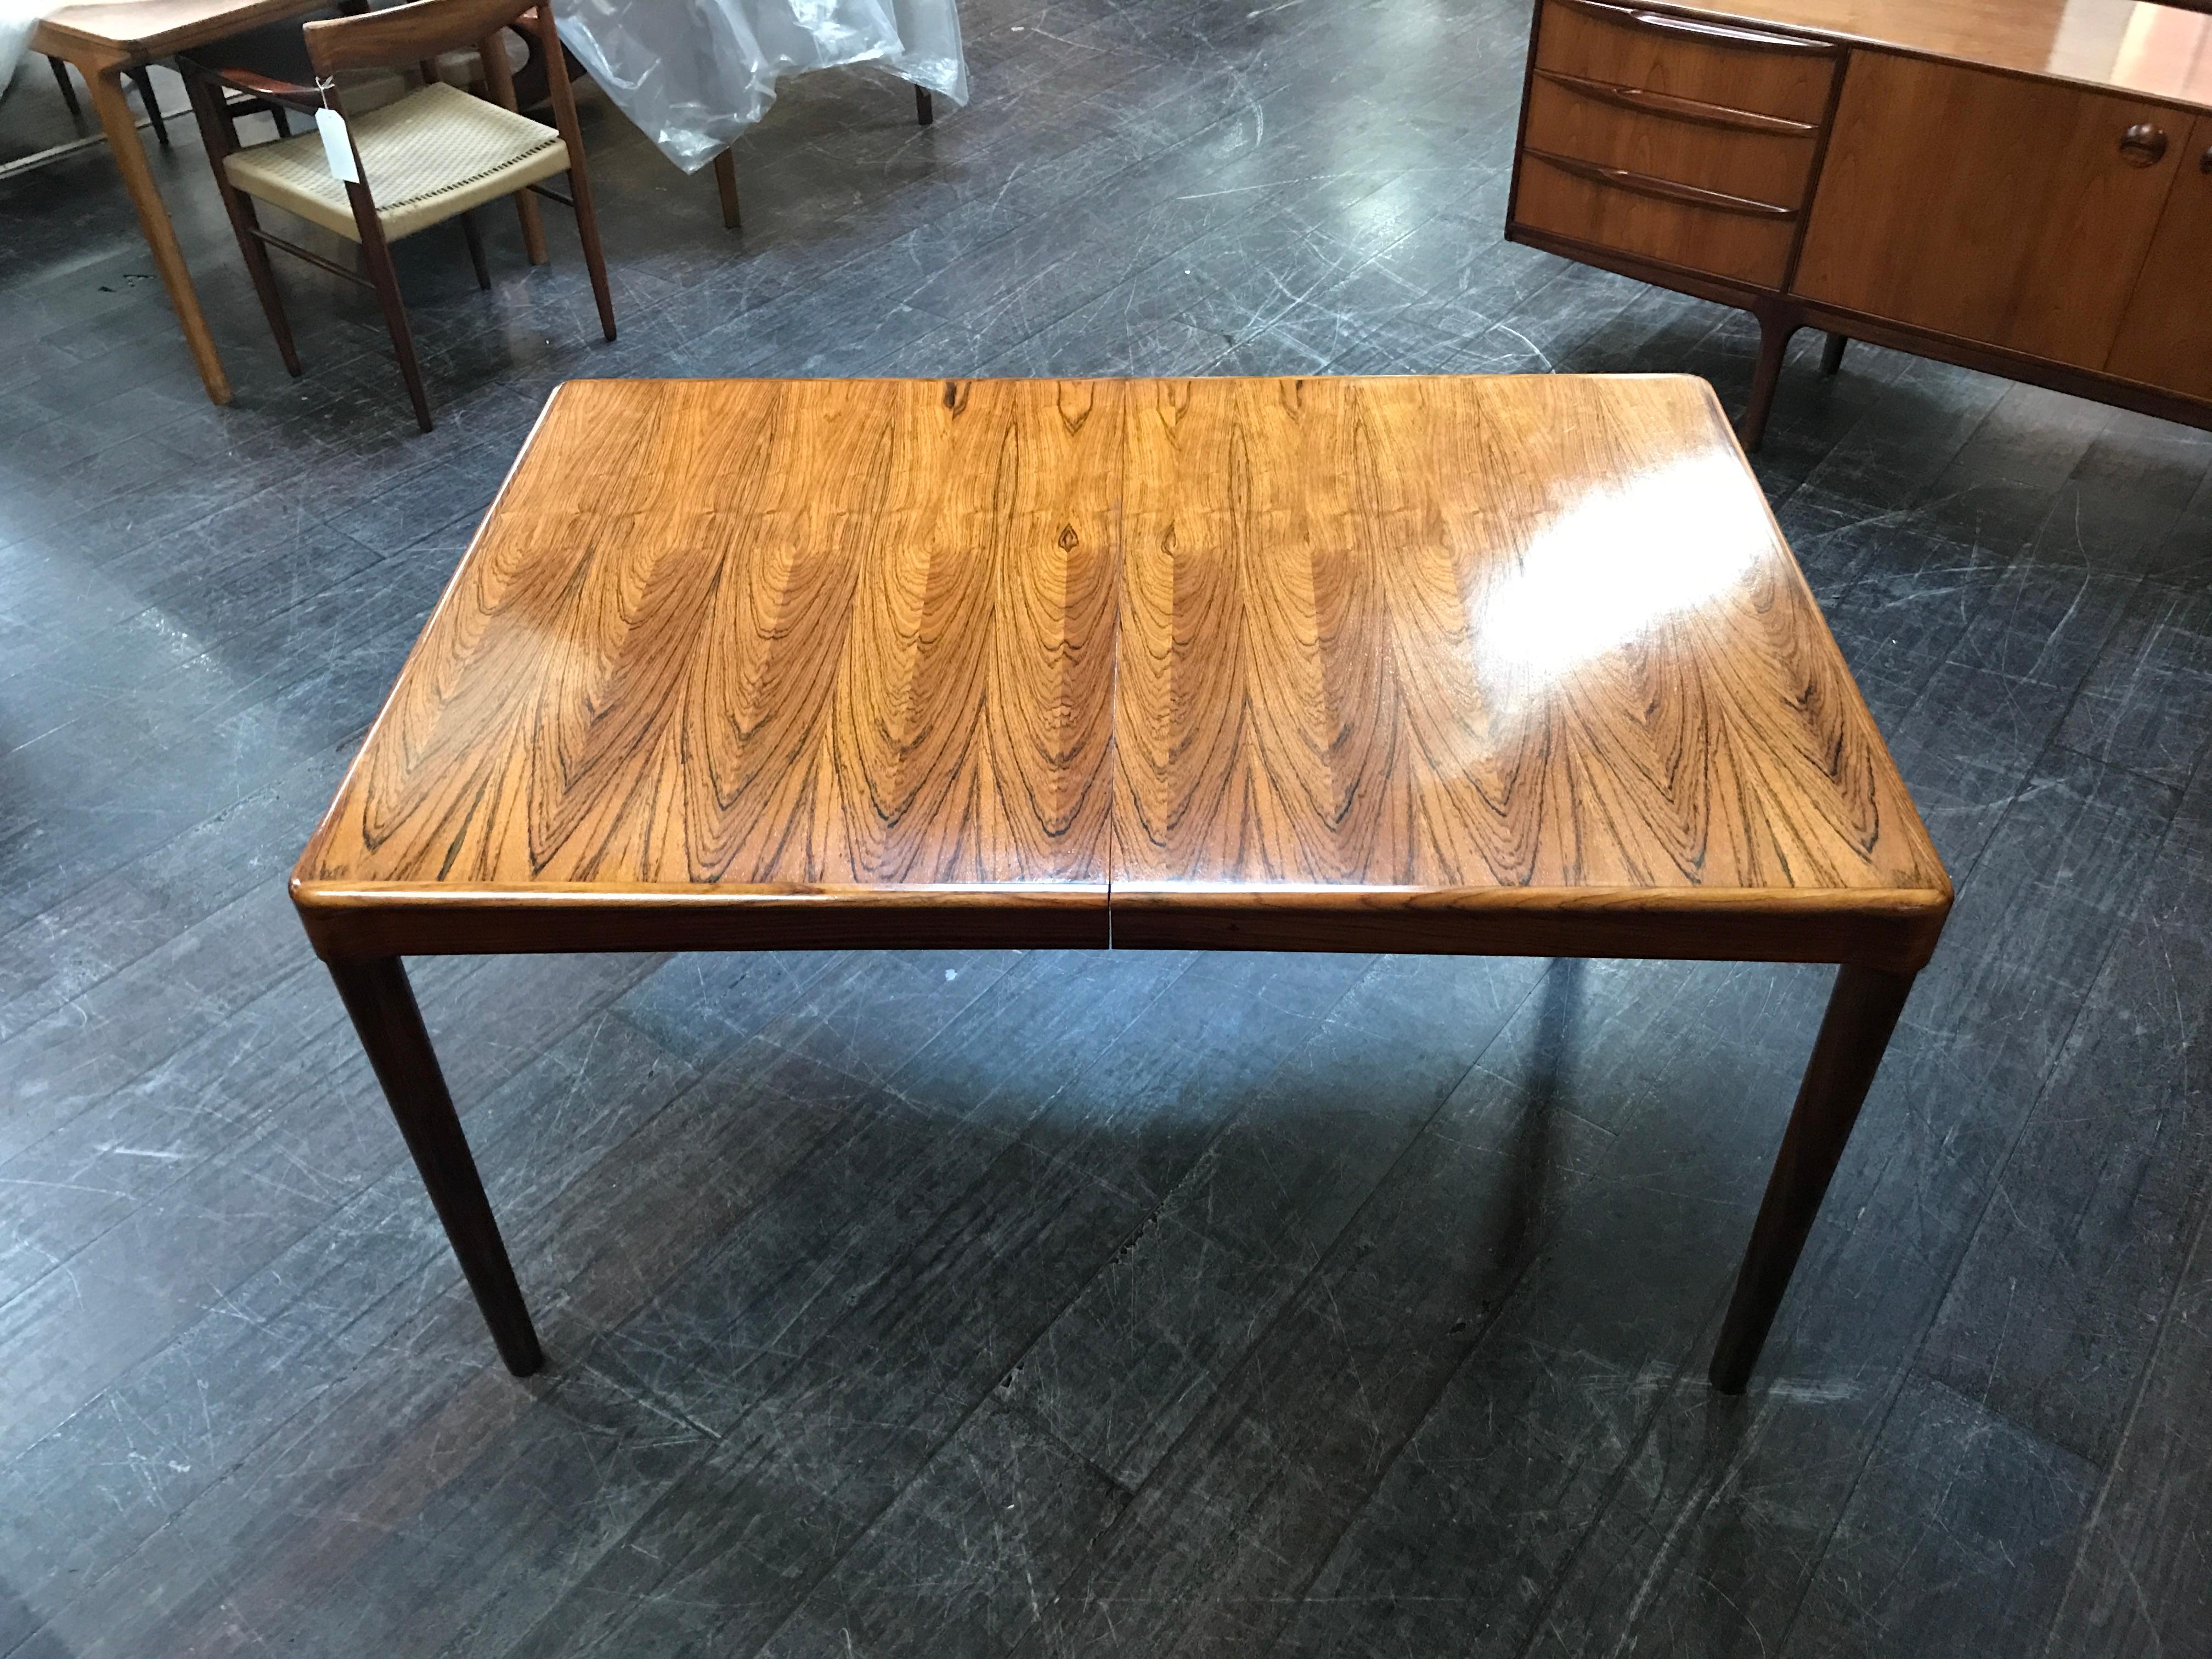 This classic Danish midcentury dining table was designed by H.W. Klein and manufactured by Bramin in the 1960s. Crafted in rosewood, this outstanding piece features a rich and vibrant grain. Design features include the beautiful manner in which the